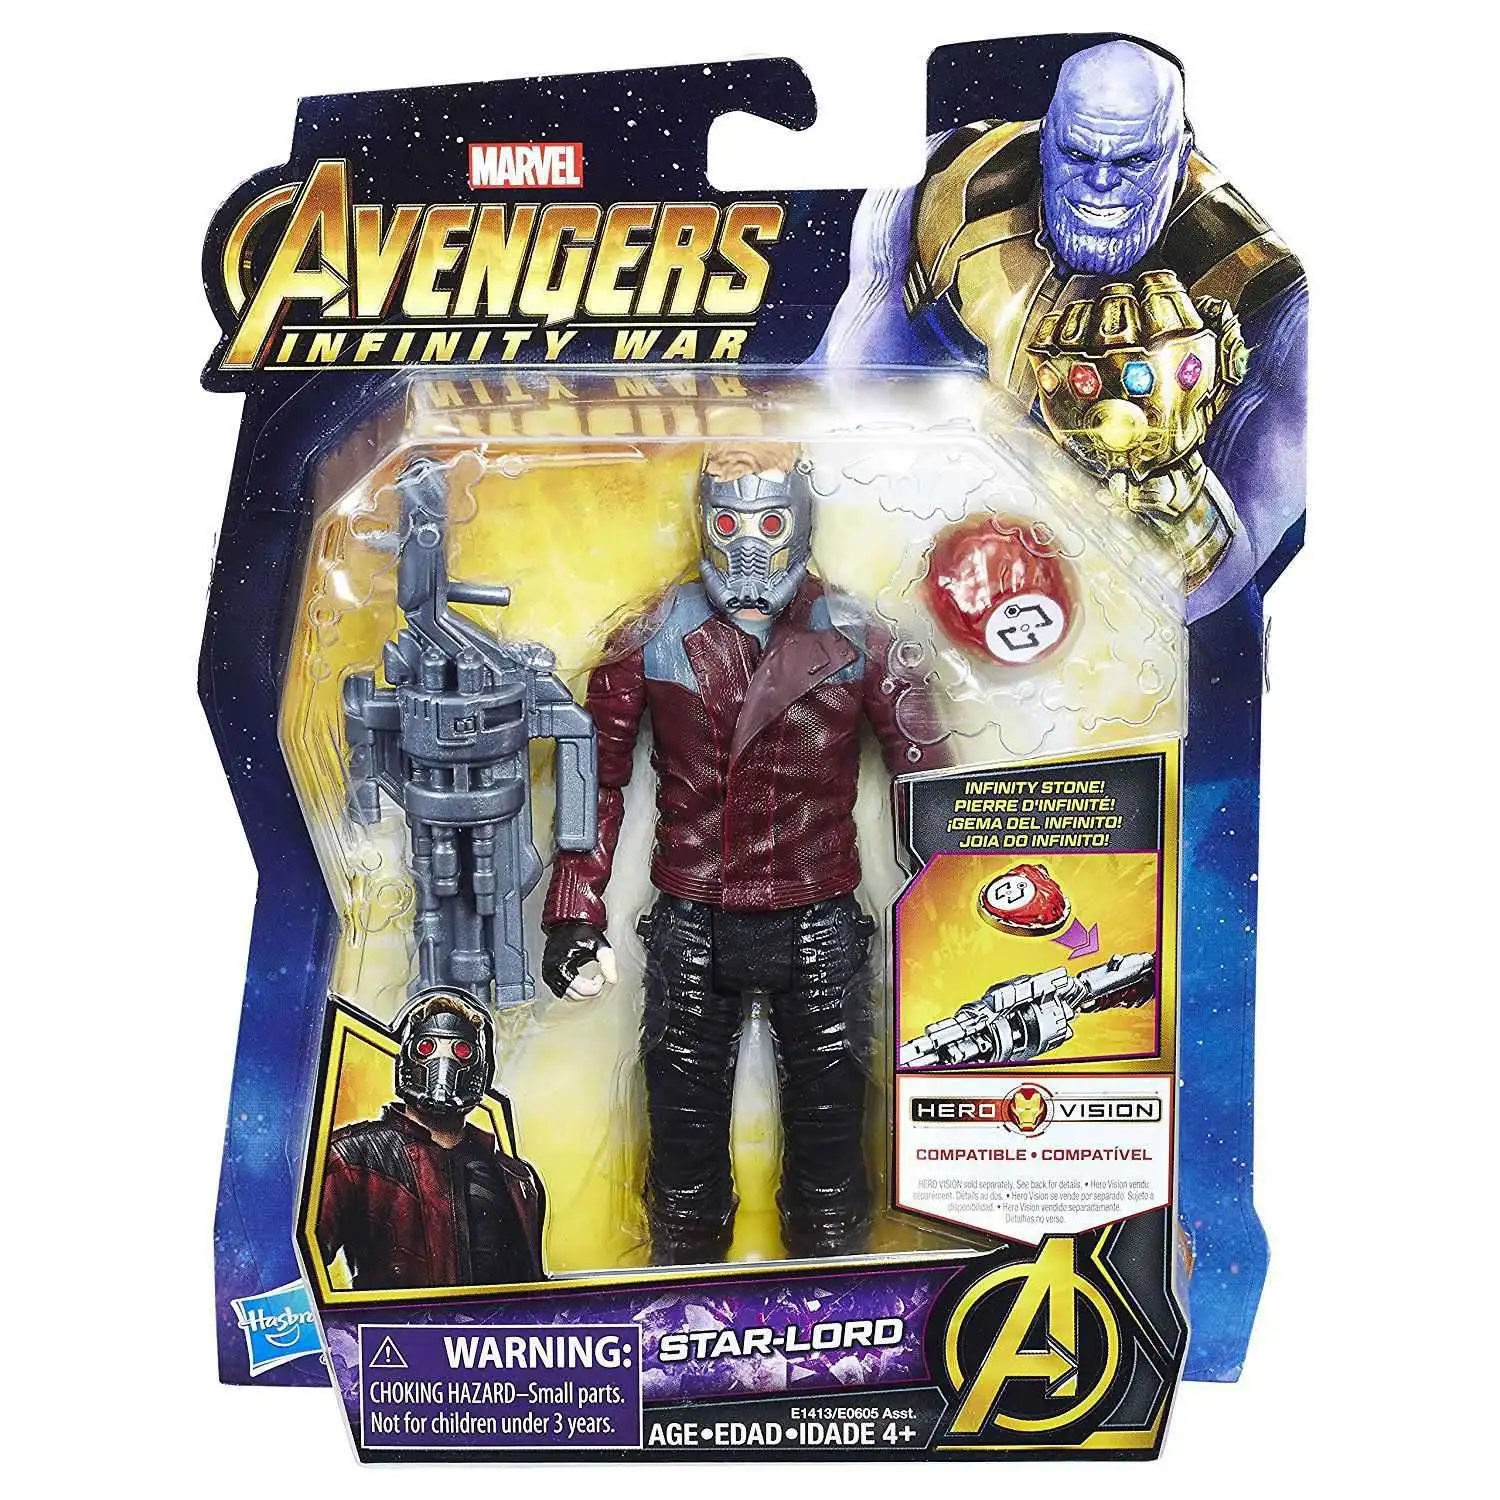 S.H Figuarts Avengers Infinity War Star-Lord Peter Quill Action Figure Authentic 